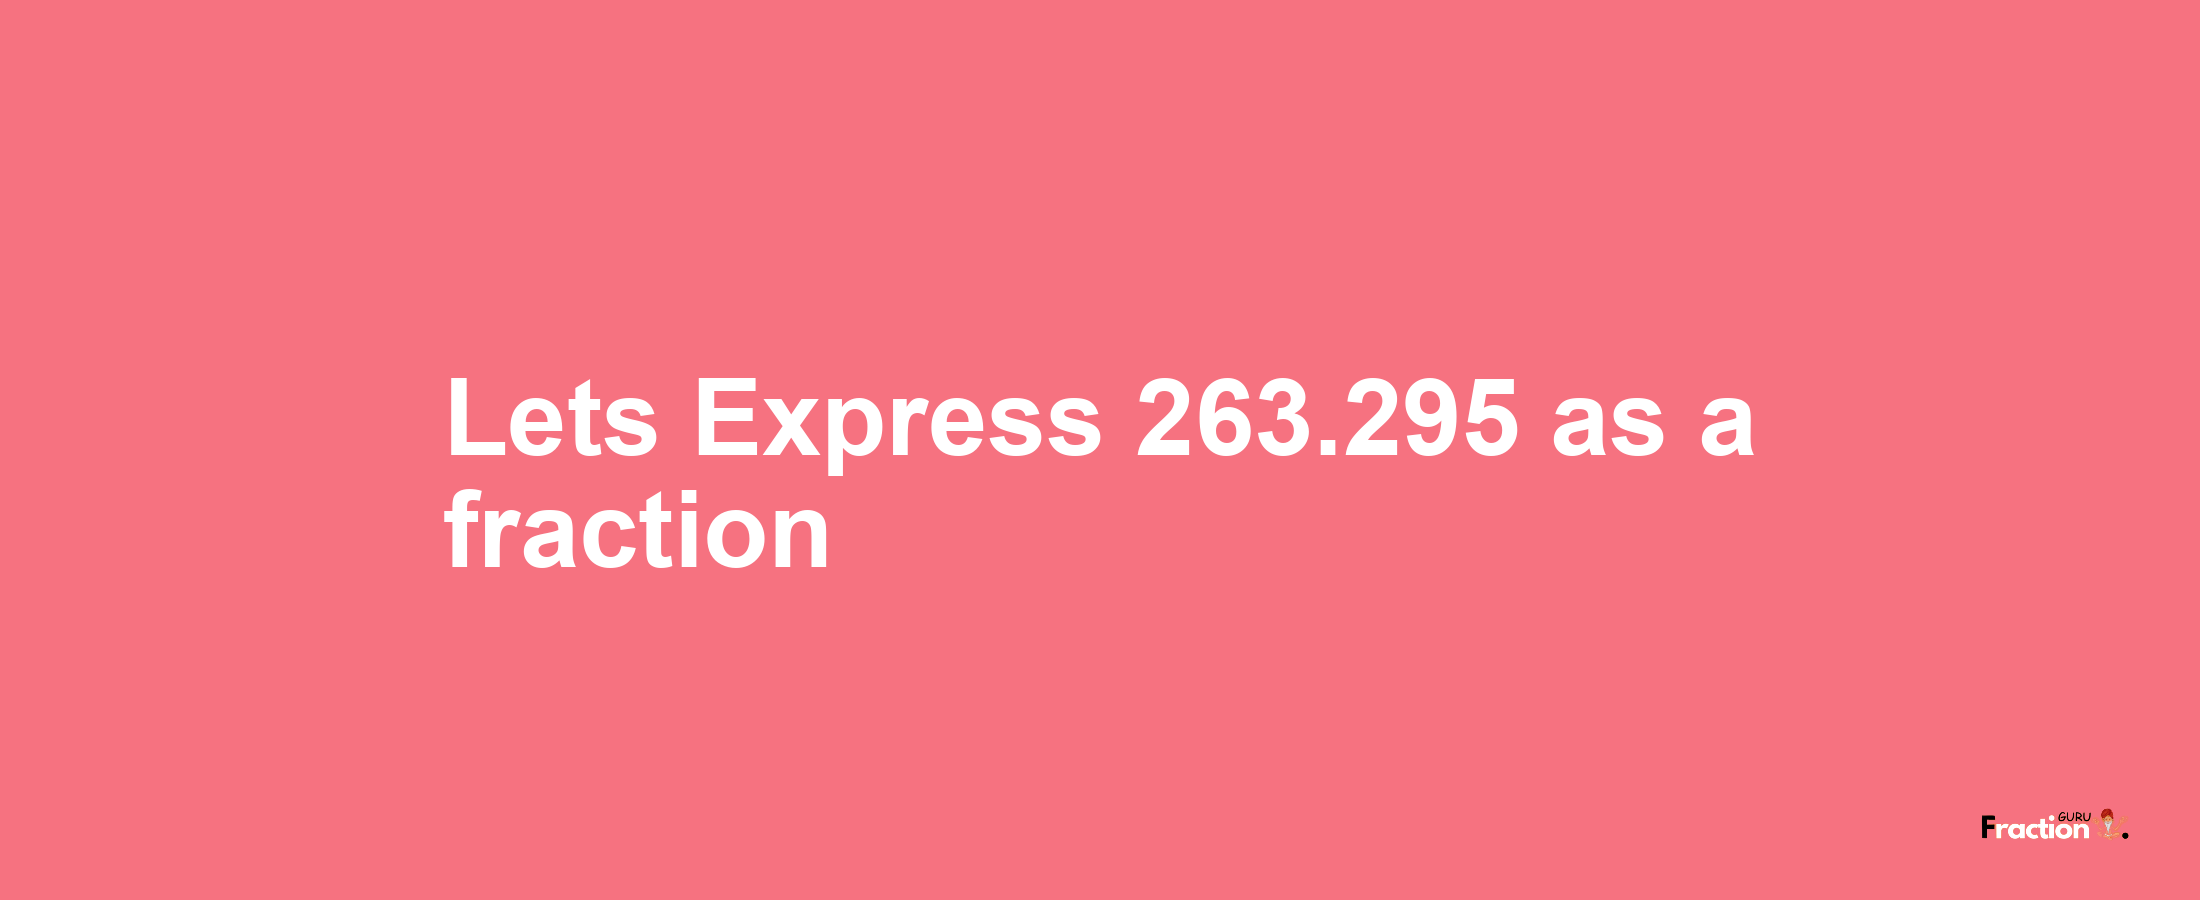 Lets Express 263.295 as afraction